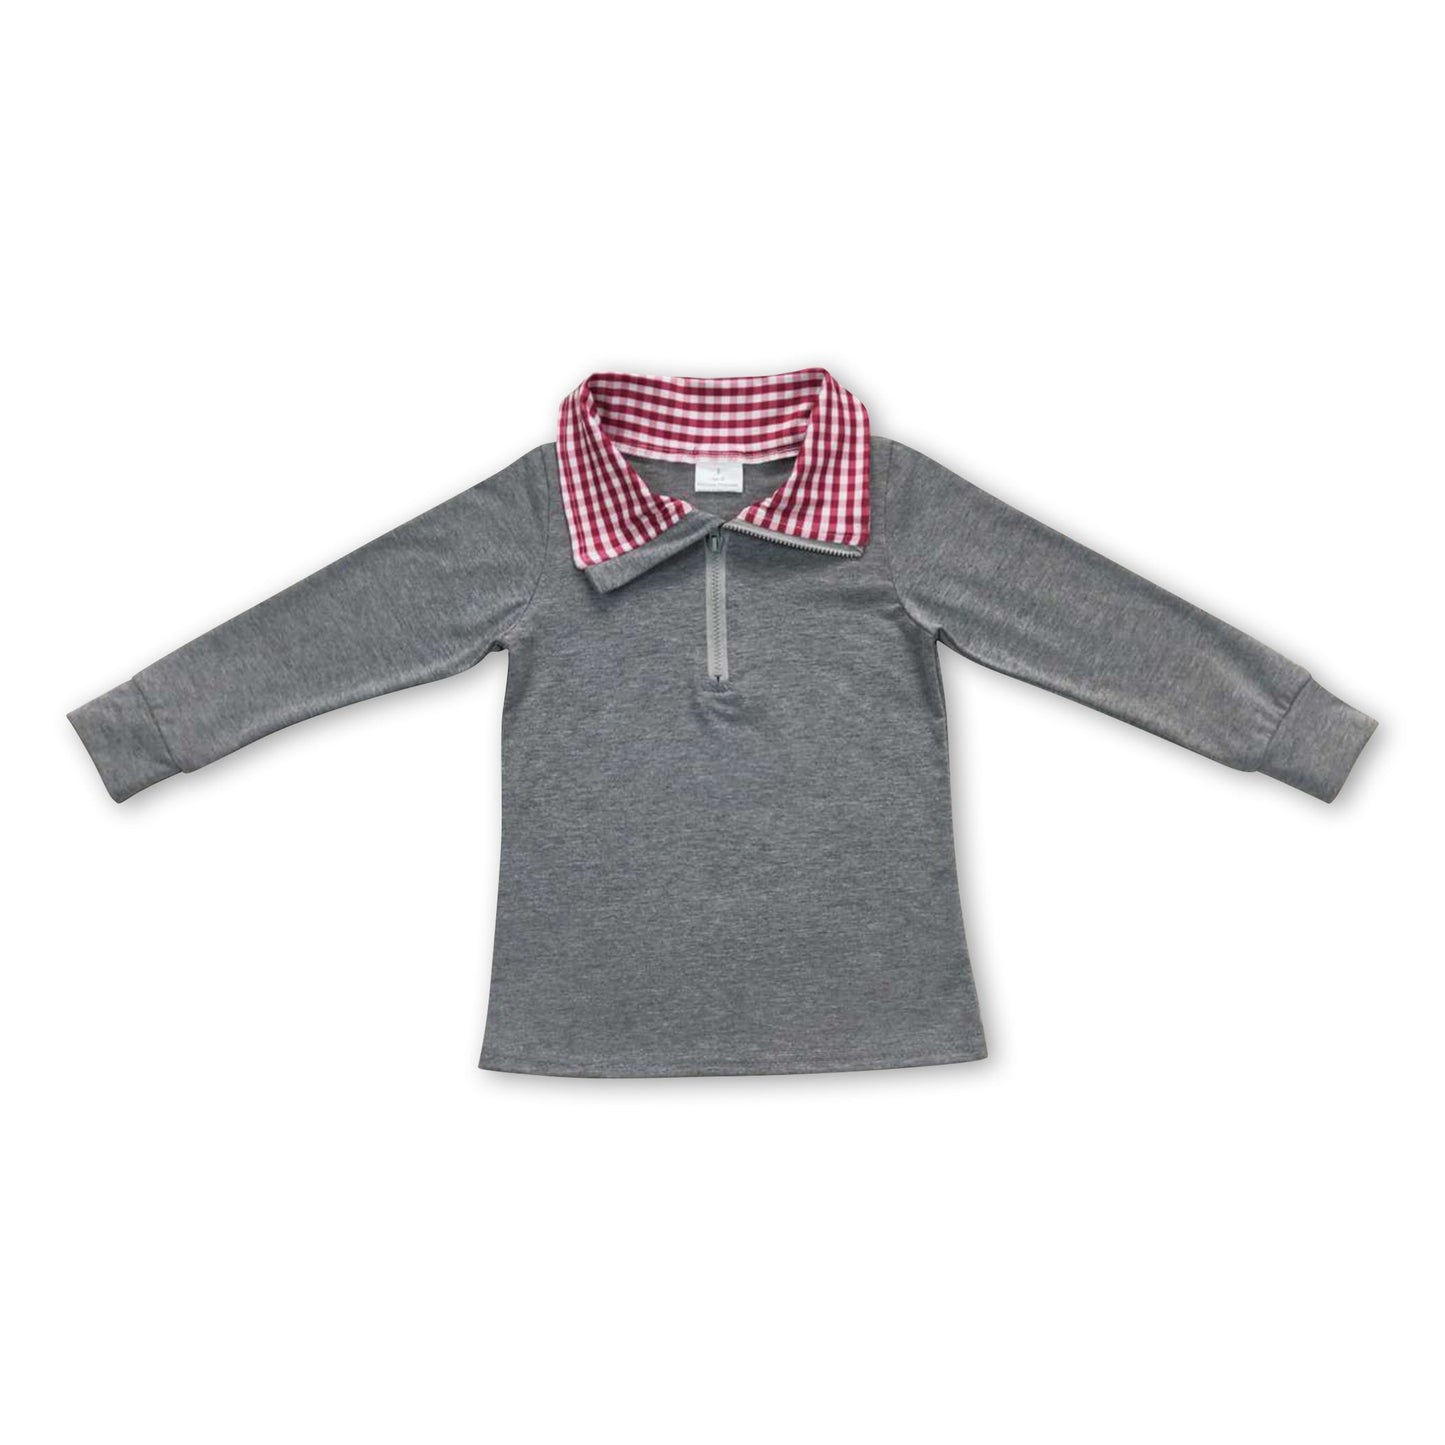 Grey cotton red plaid kids Christmas zipper pullover